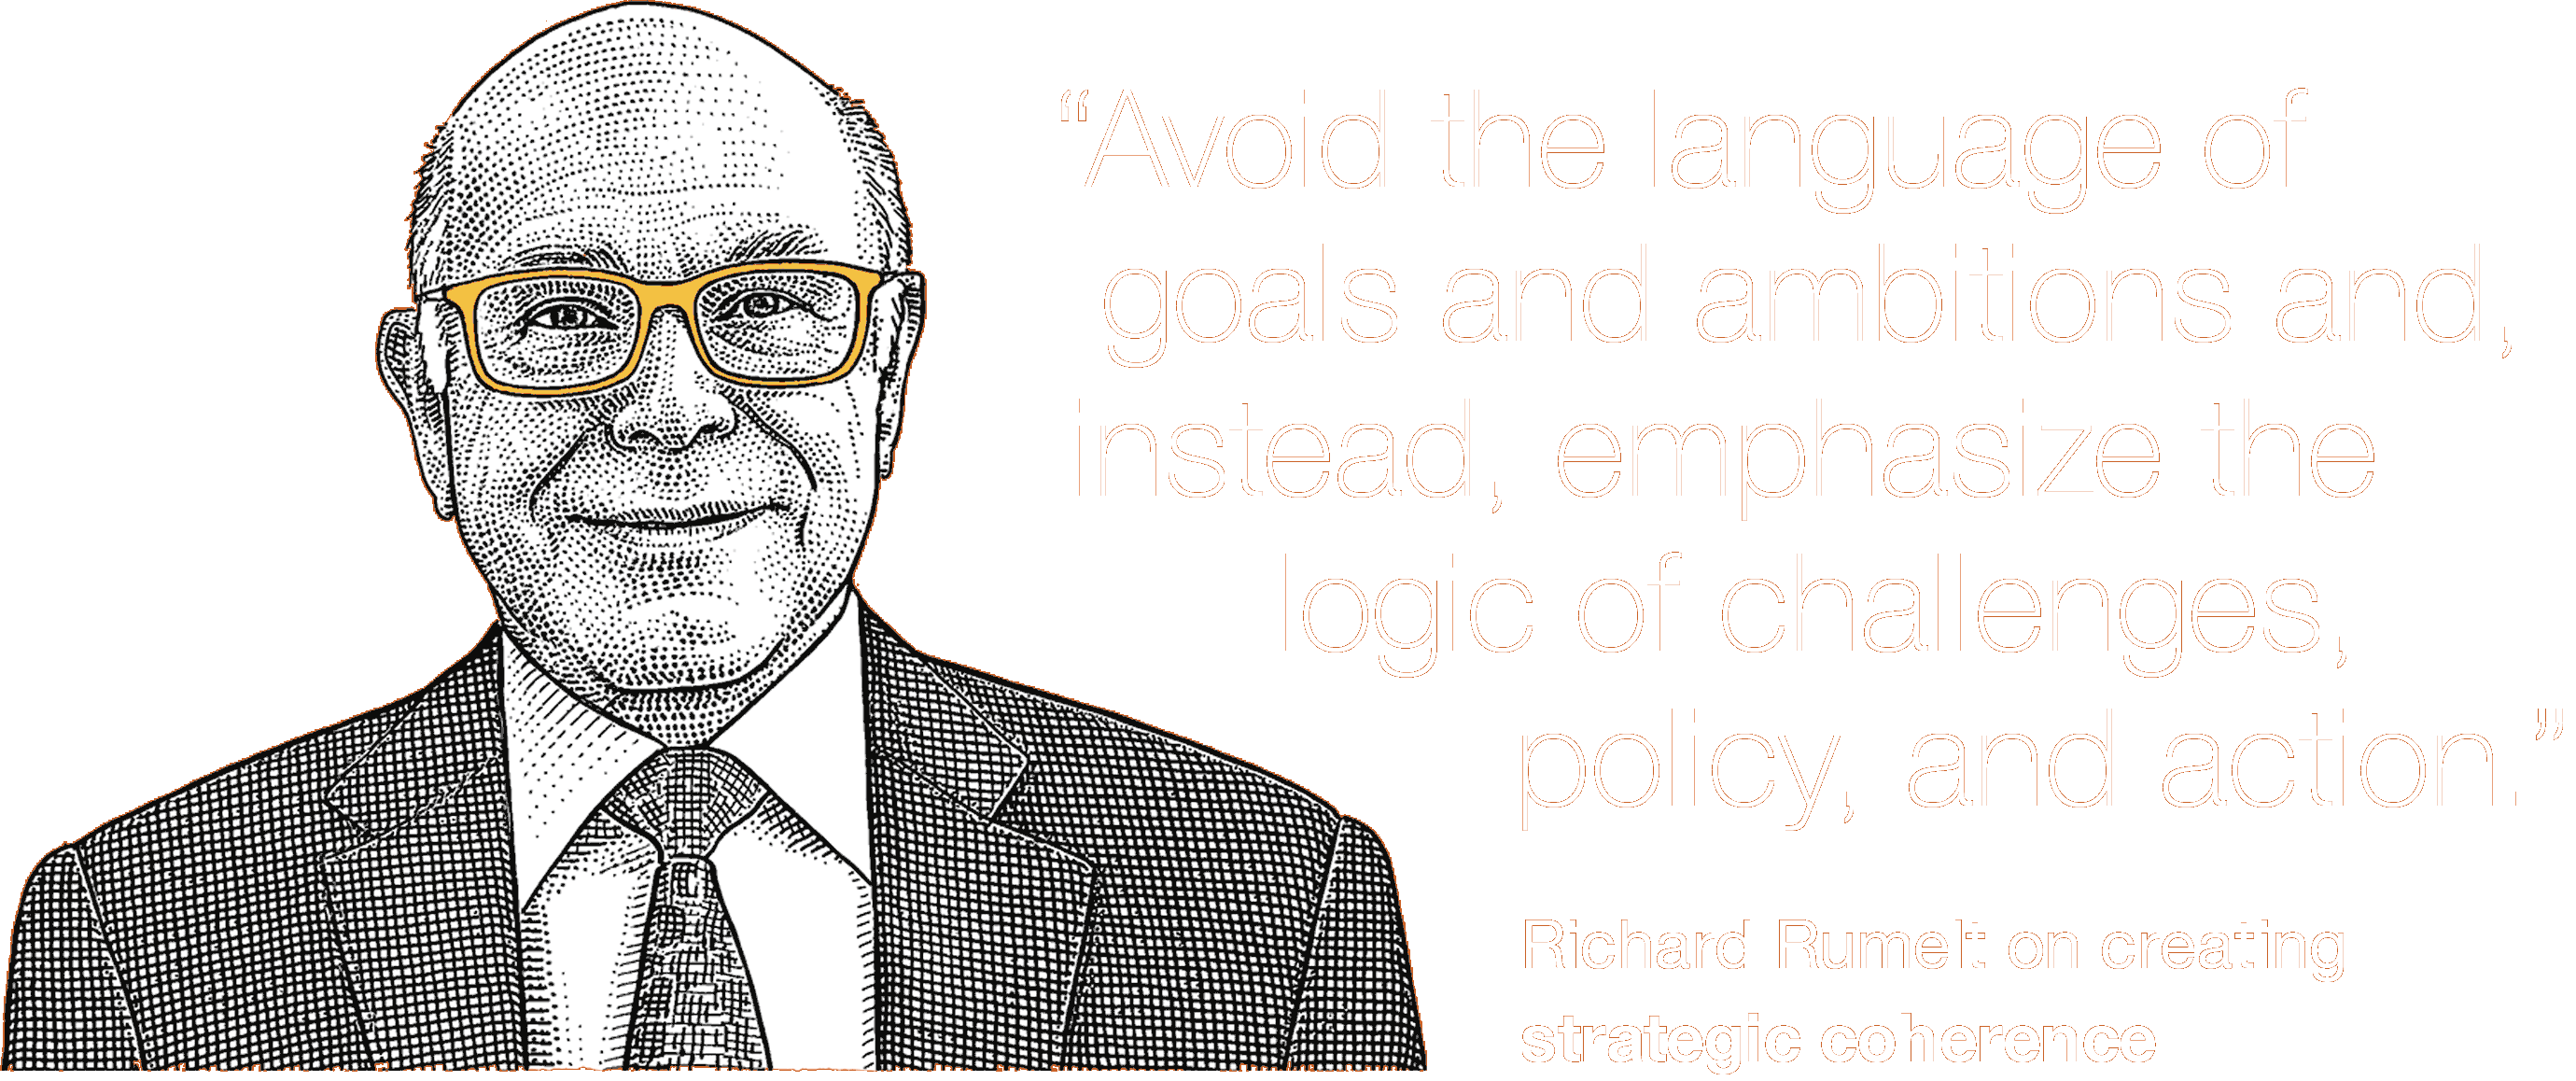 “Avoid the language of goals and ambitions and, instead, emphasize the logic of challenges, policy, and action.”